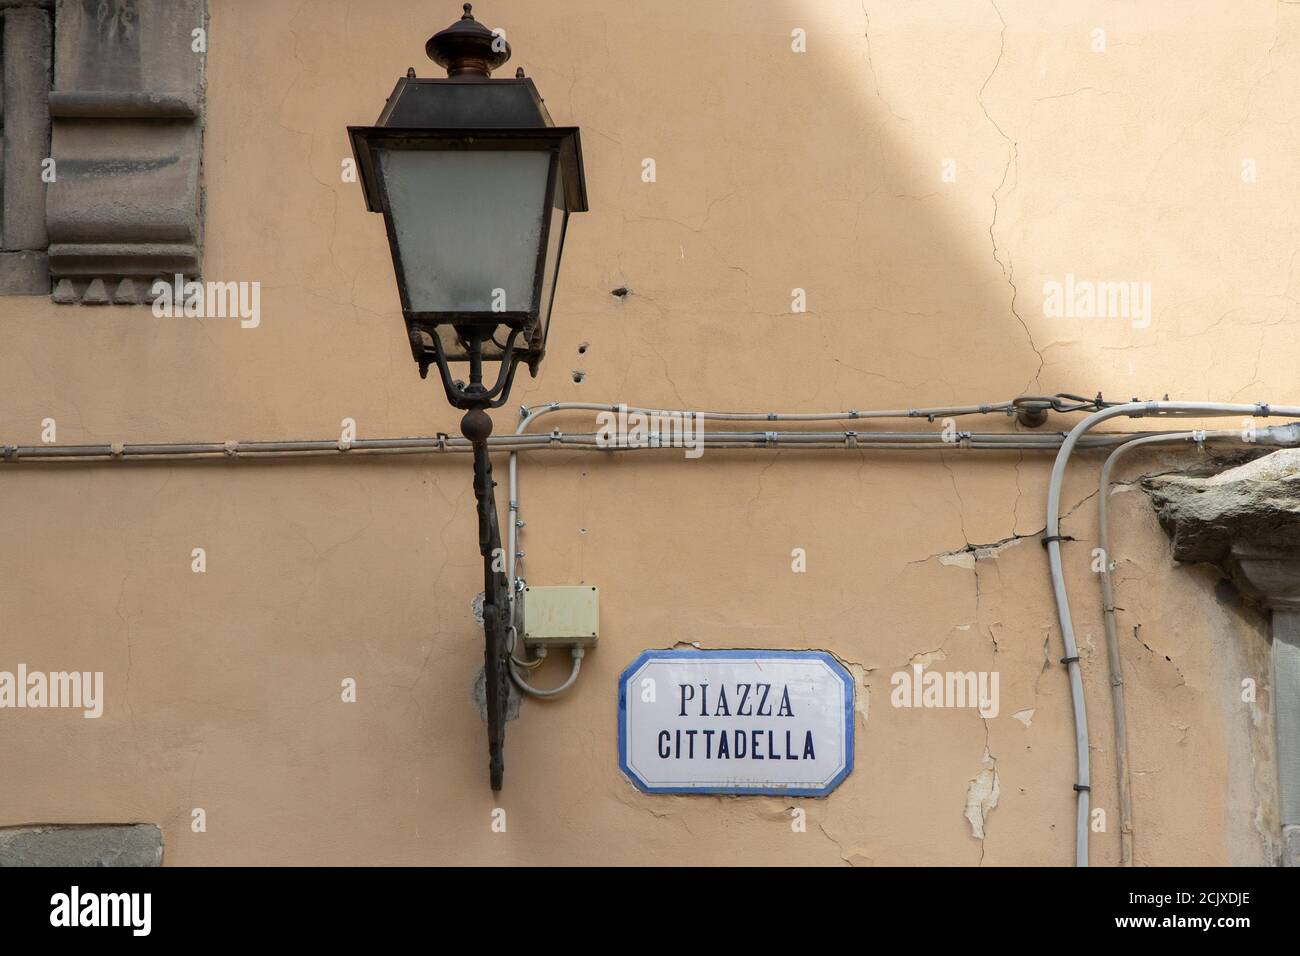 Piazza Cittadella street sign and Lantern in Lucca, Tuscany, Italy, Europe. Stock Photo